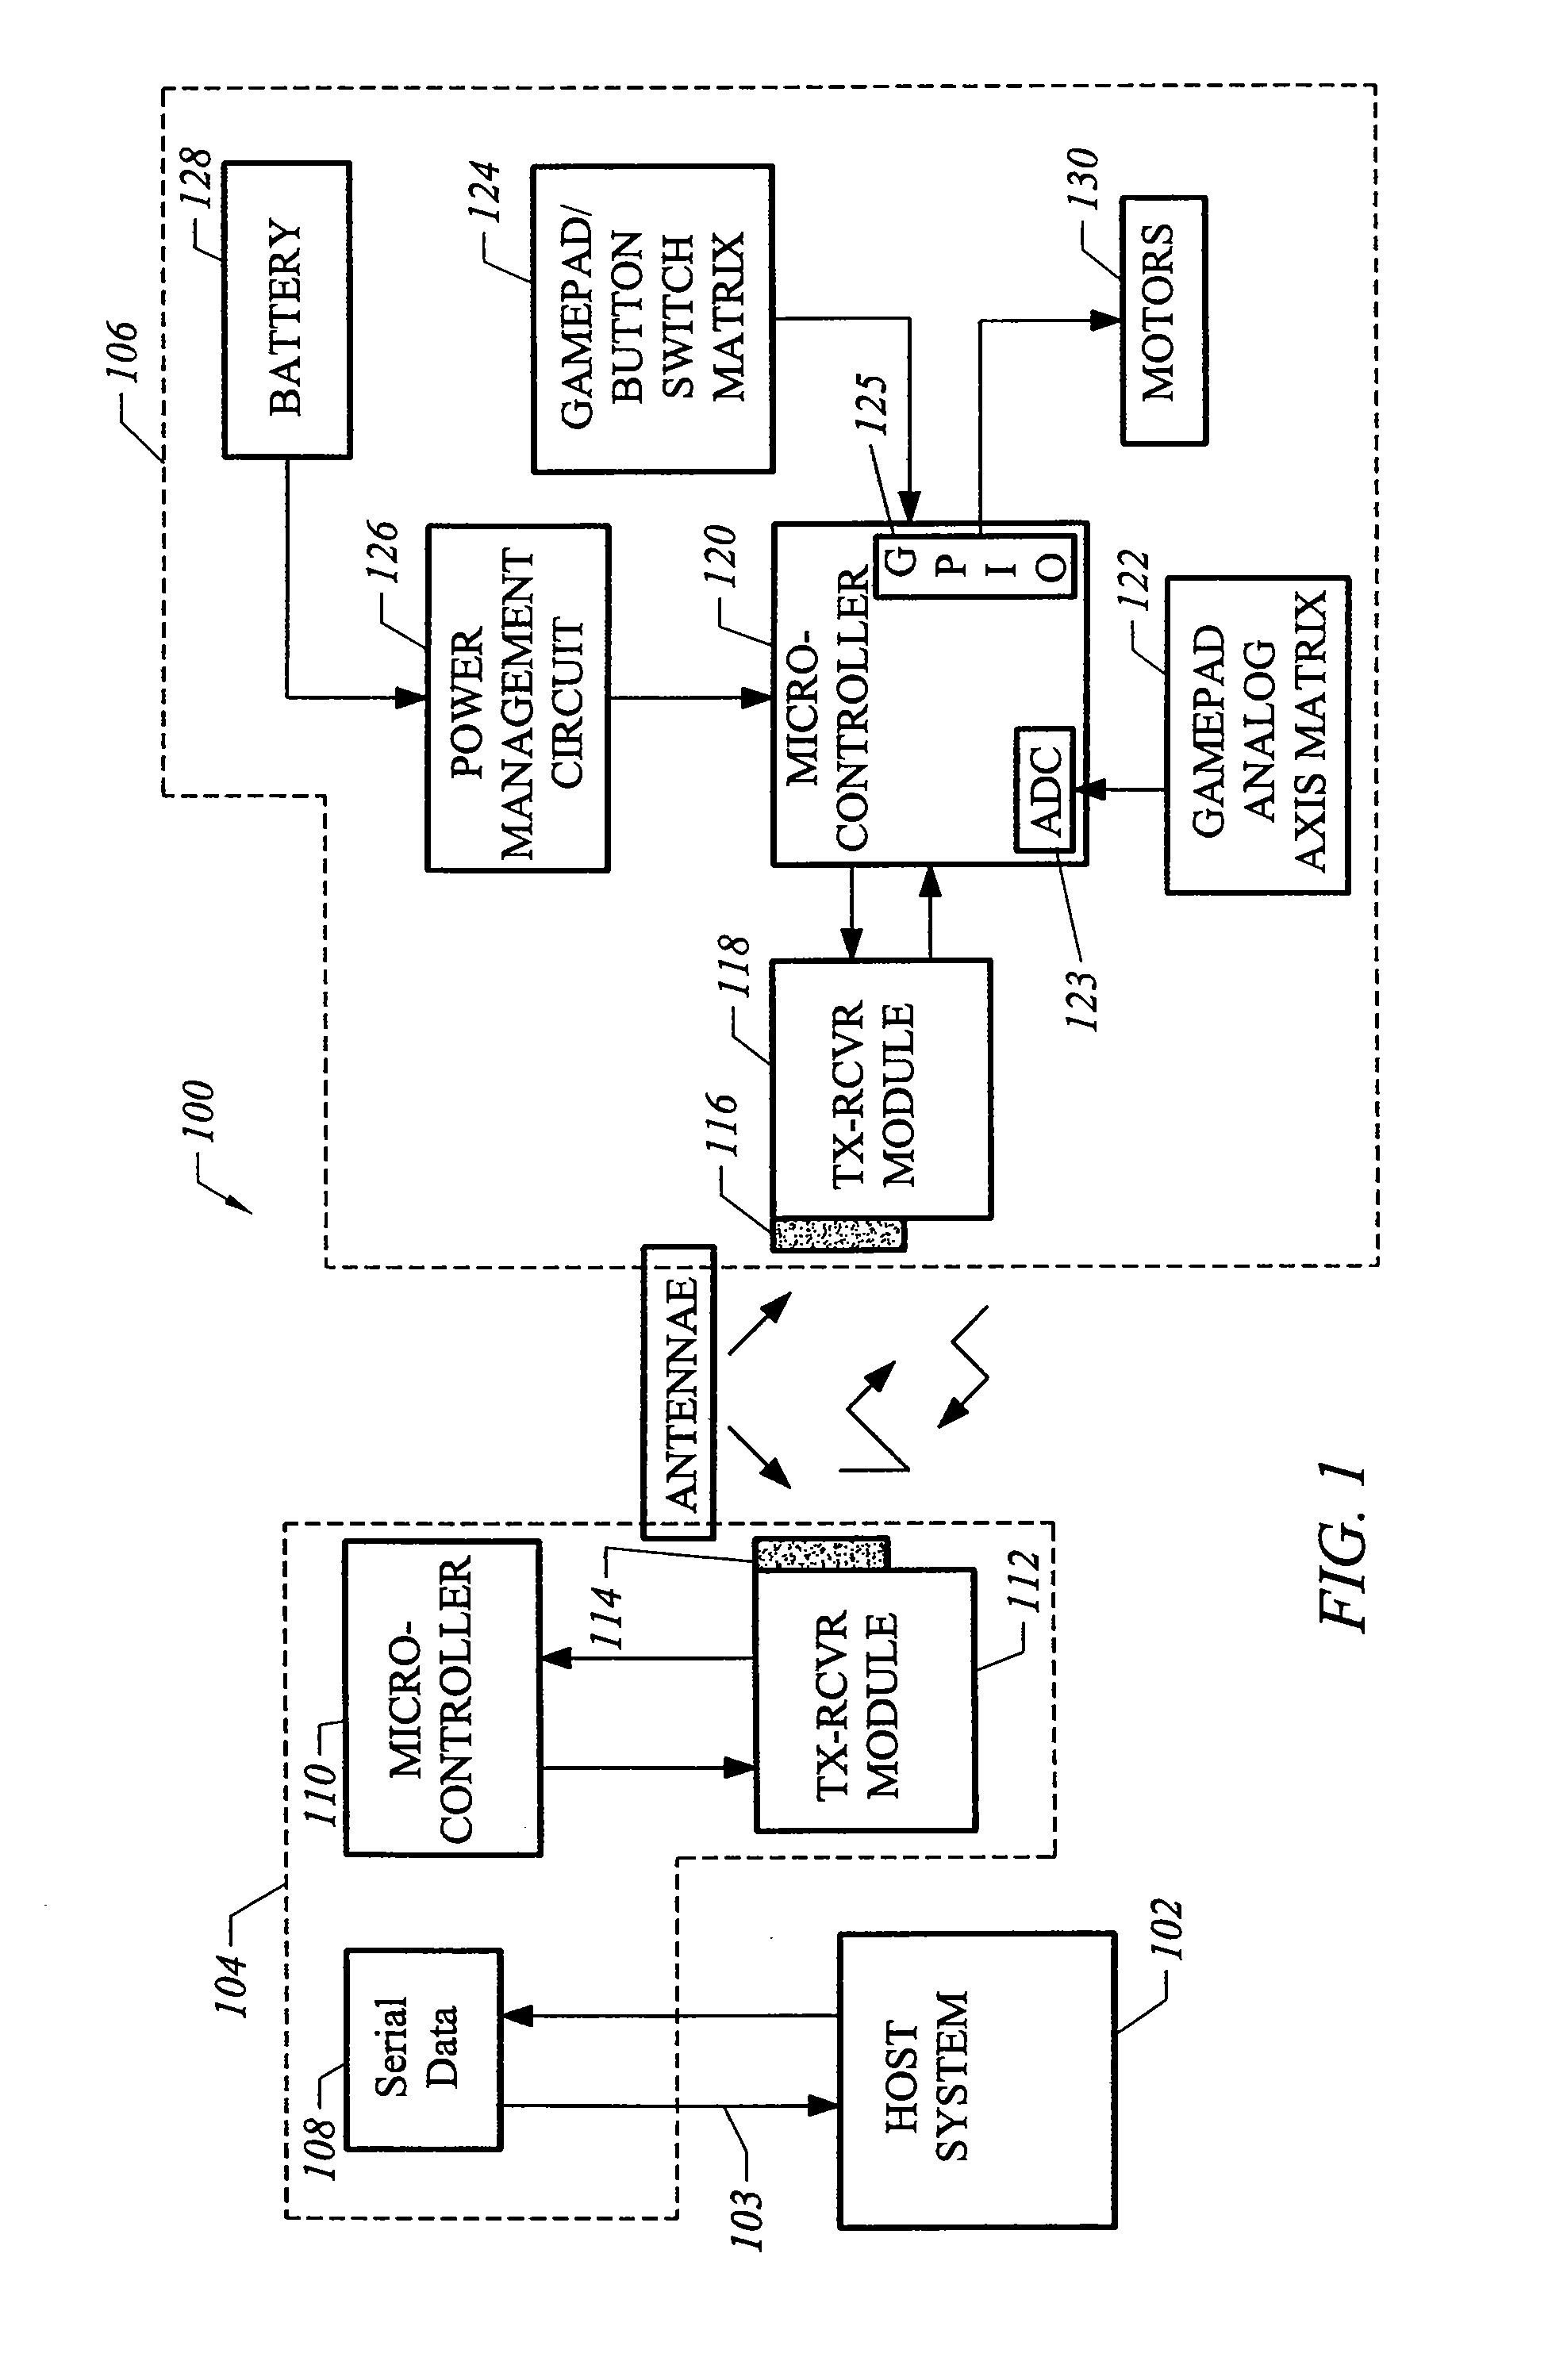 High-frequency wireless peripheral device with auto-connection and auto-synchronization